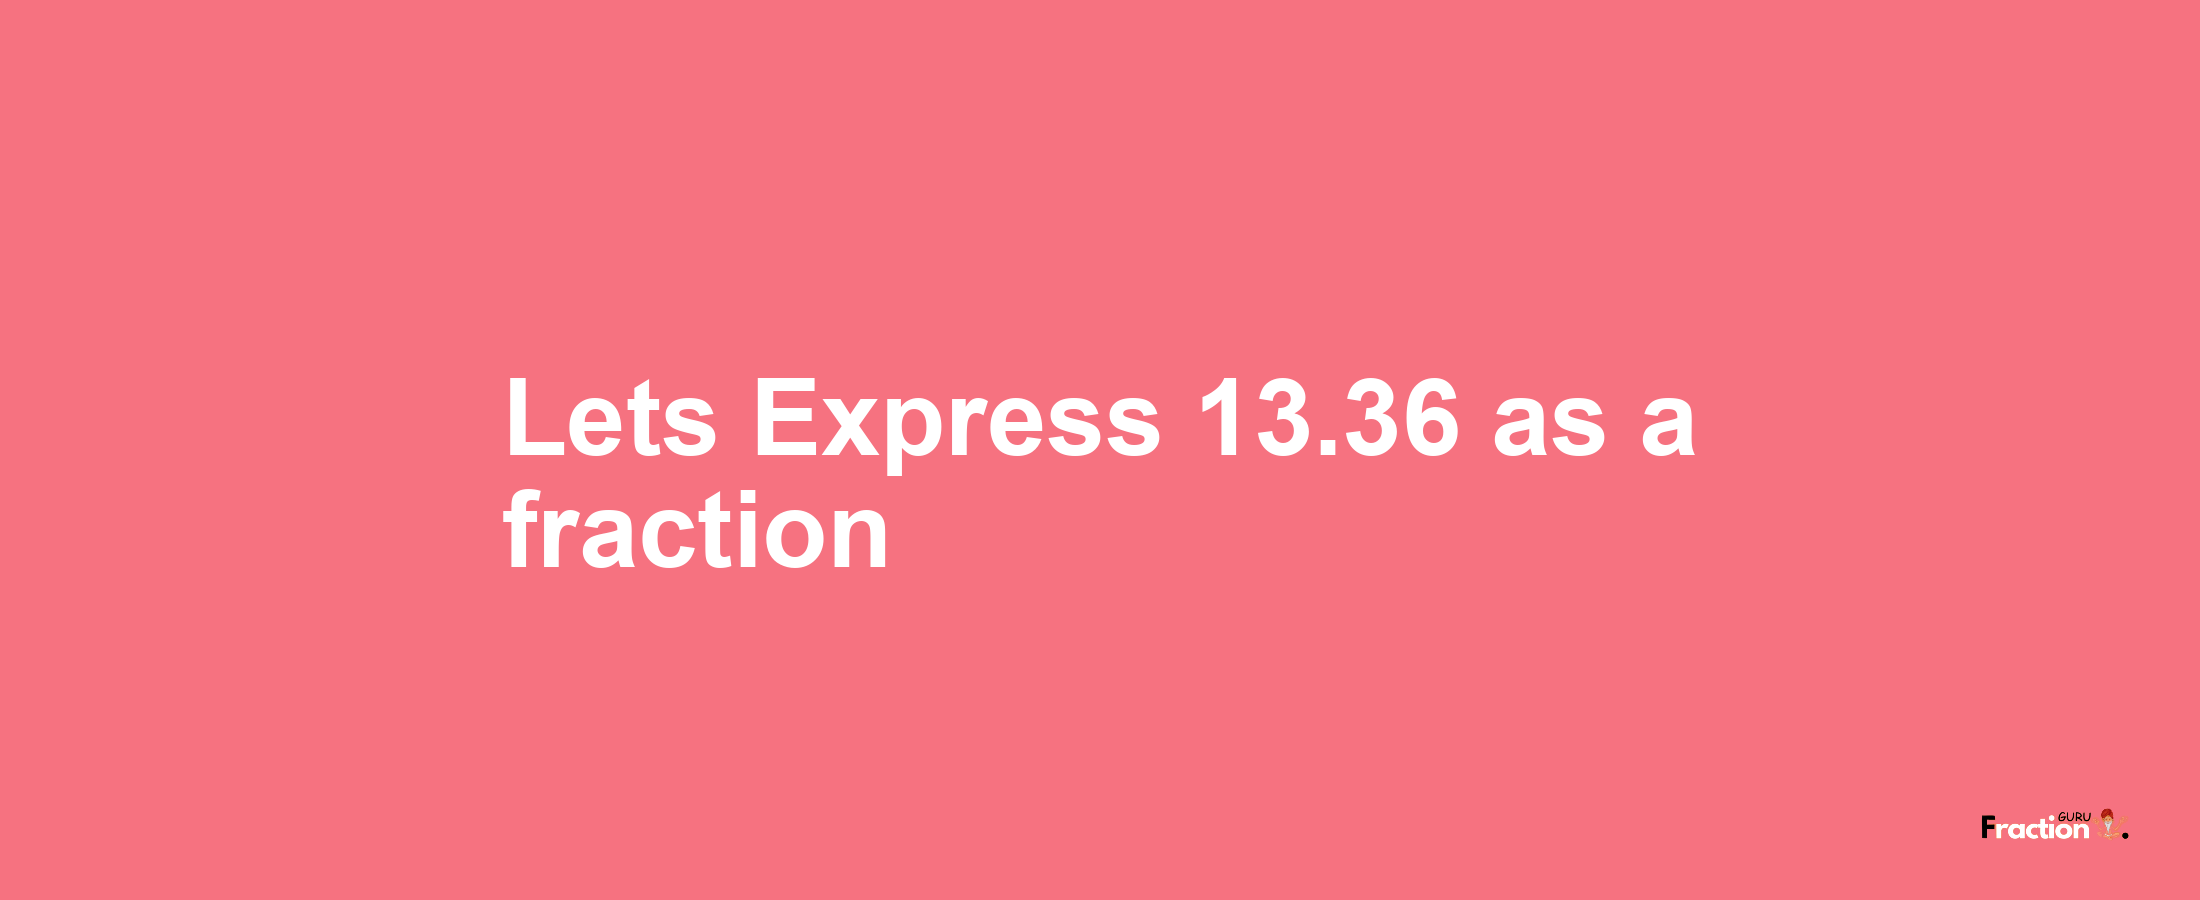 Lets Express 13.36 as afraction